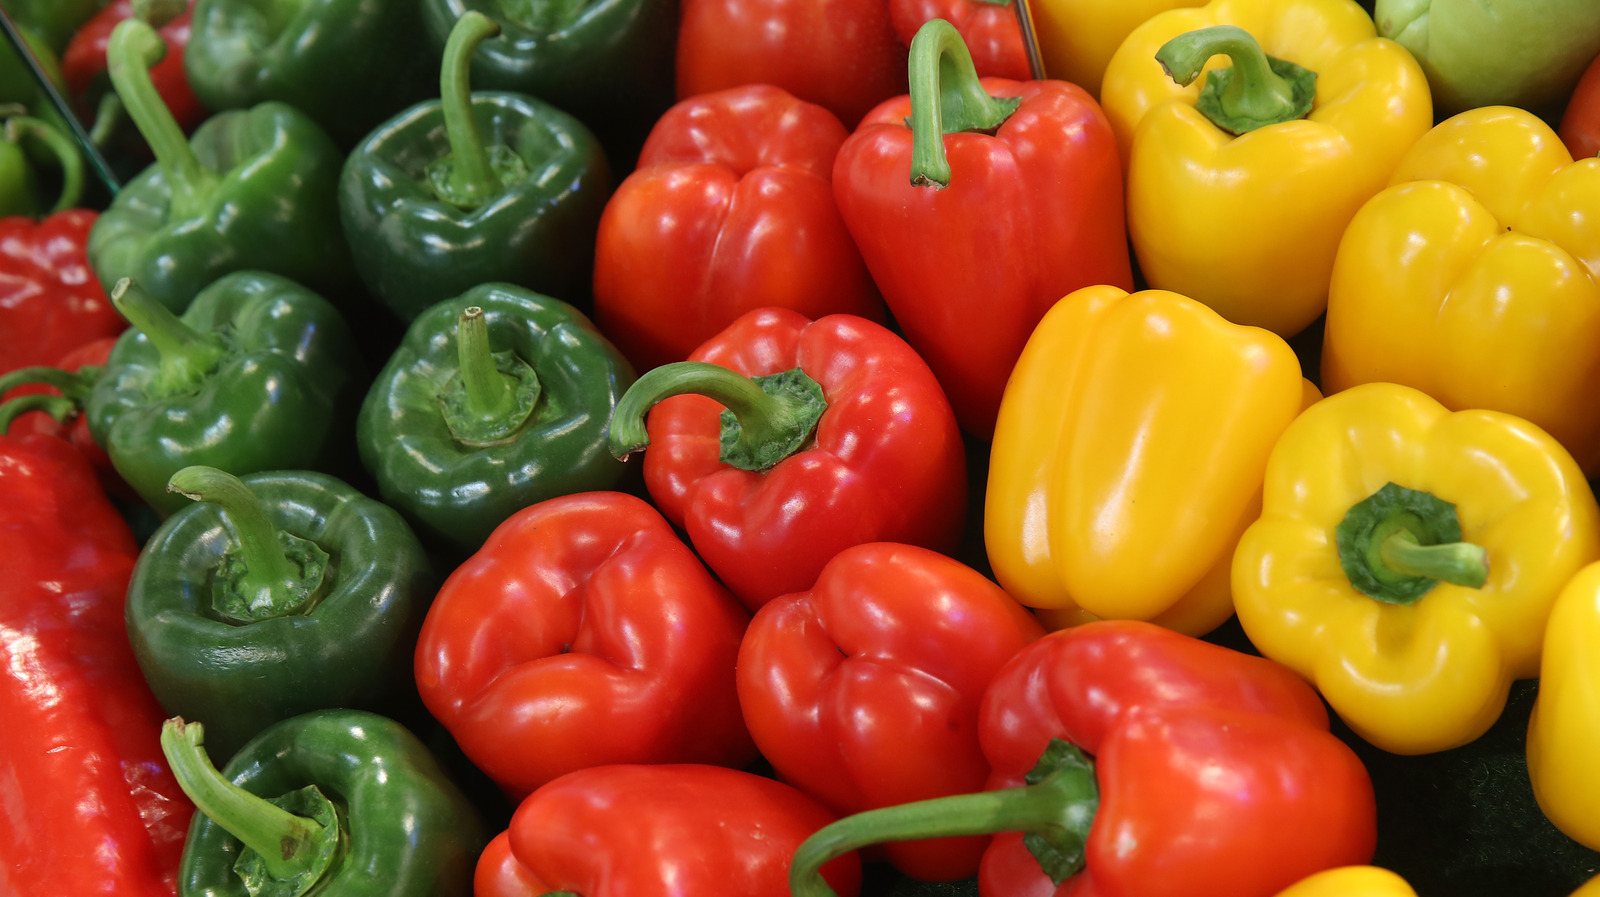 https://www.thedailymeal.com/img/gallery/whats-the-difference-between-green-yellow-and-red-bell-peppers/l-intro-1670857492.jpg